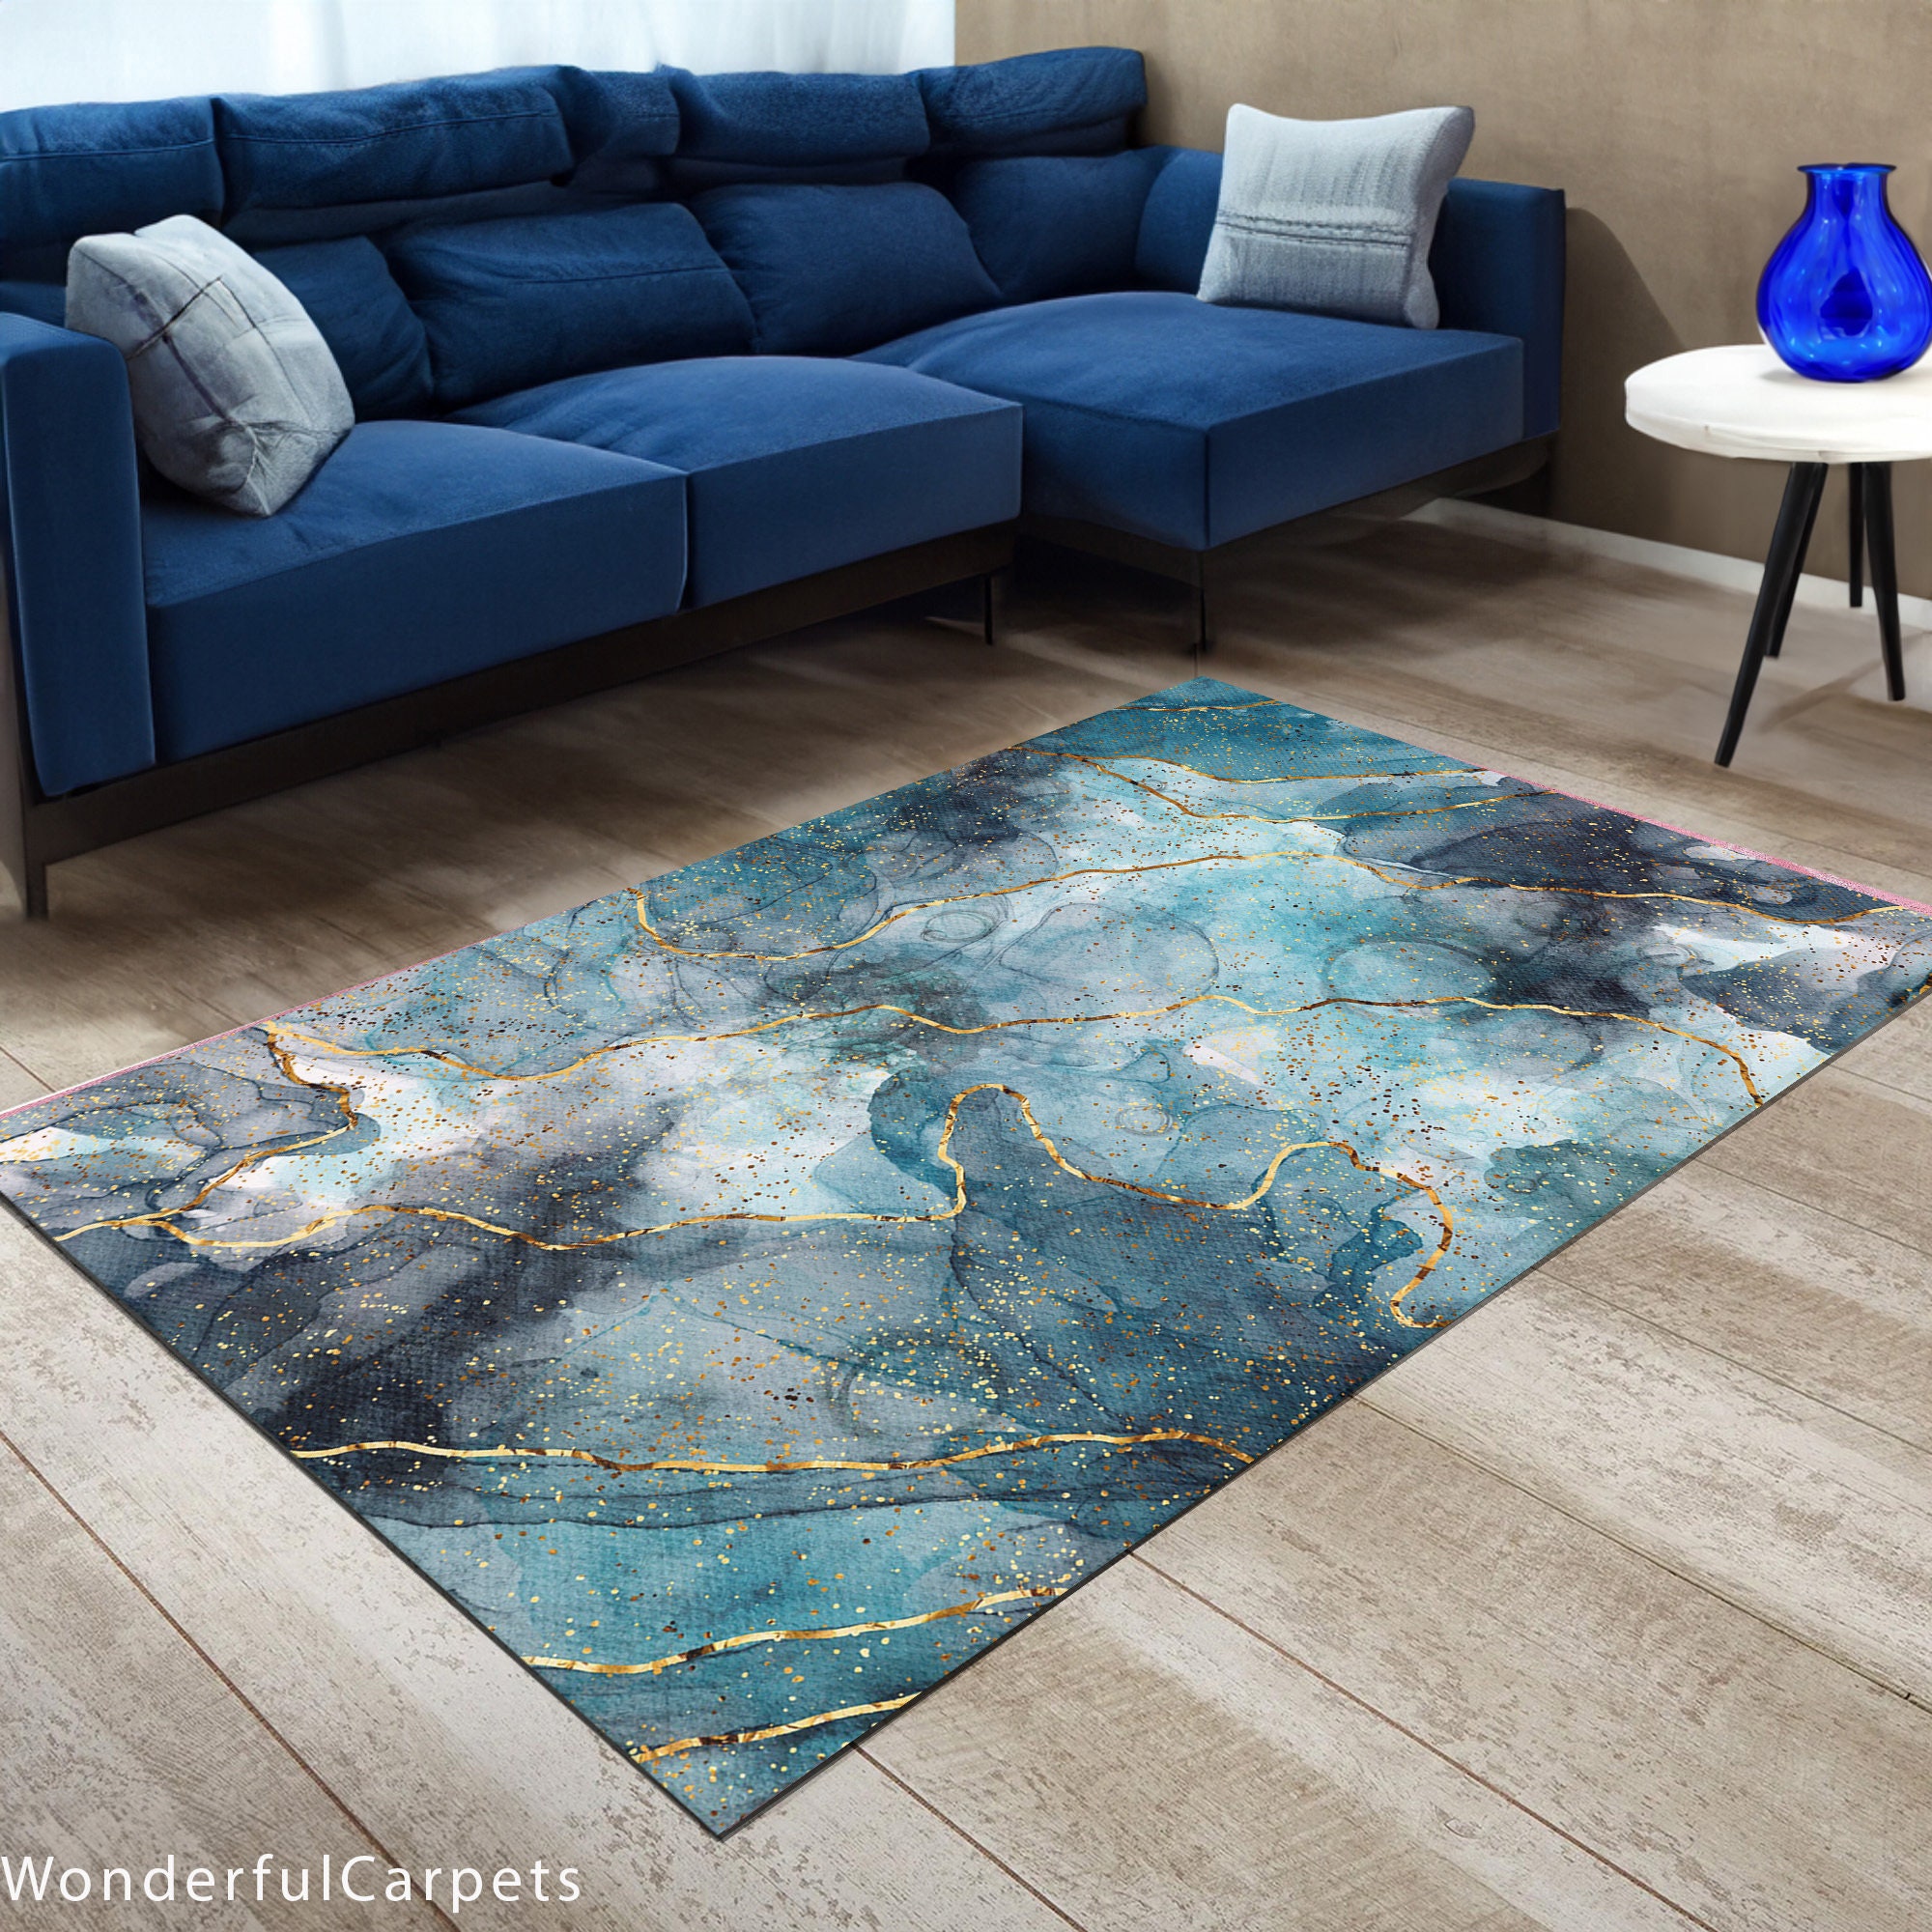 Pinbeam Area Rug Abstract Old Natural Brown Barn Wood Wall Wooden Home  Decor Floor Rug 3' x 5' Carpet